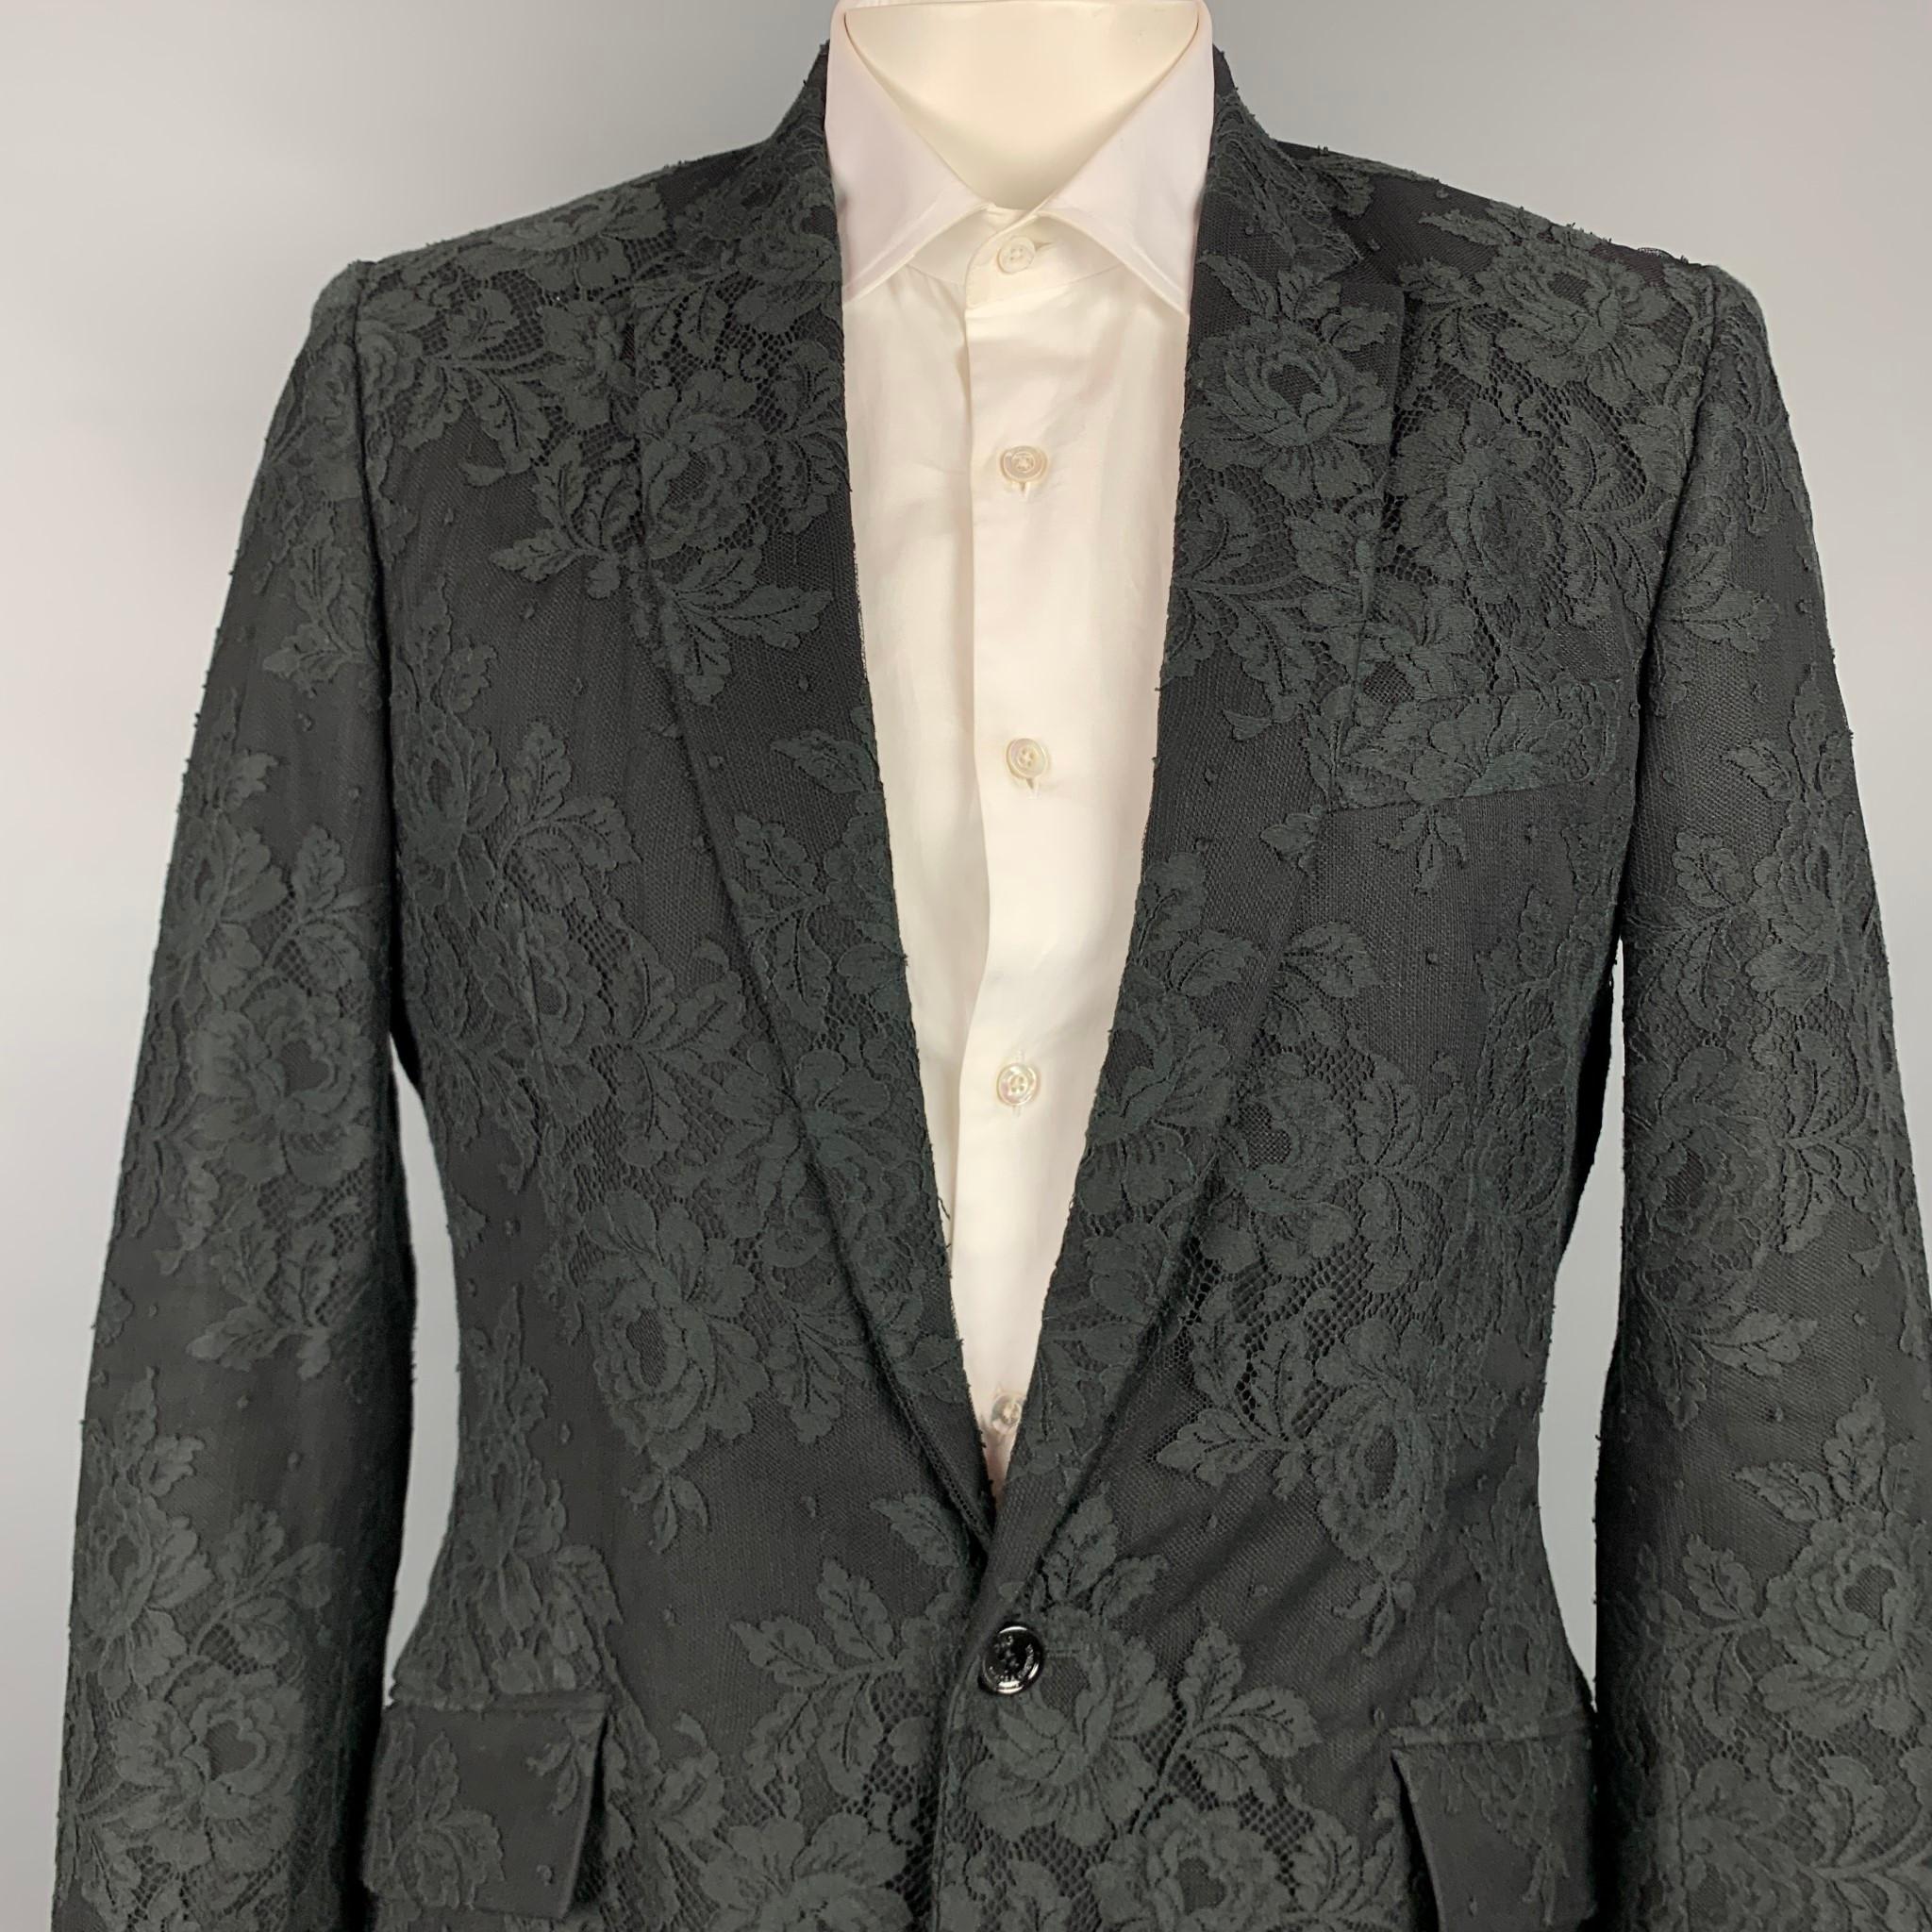 D&G by DOLCE & GABBANA sport coat comes in a black lace material with a full liner featuring a notch lapel, flap pockets, and a single button closure. Made in Italy. 

Very Good Pre-Owned Condition.
Marked: Size tag